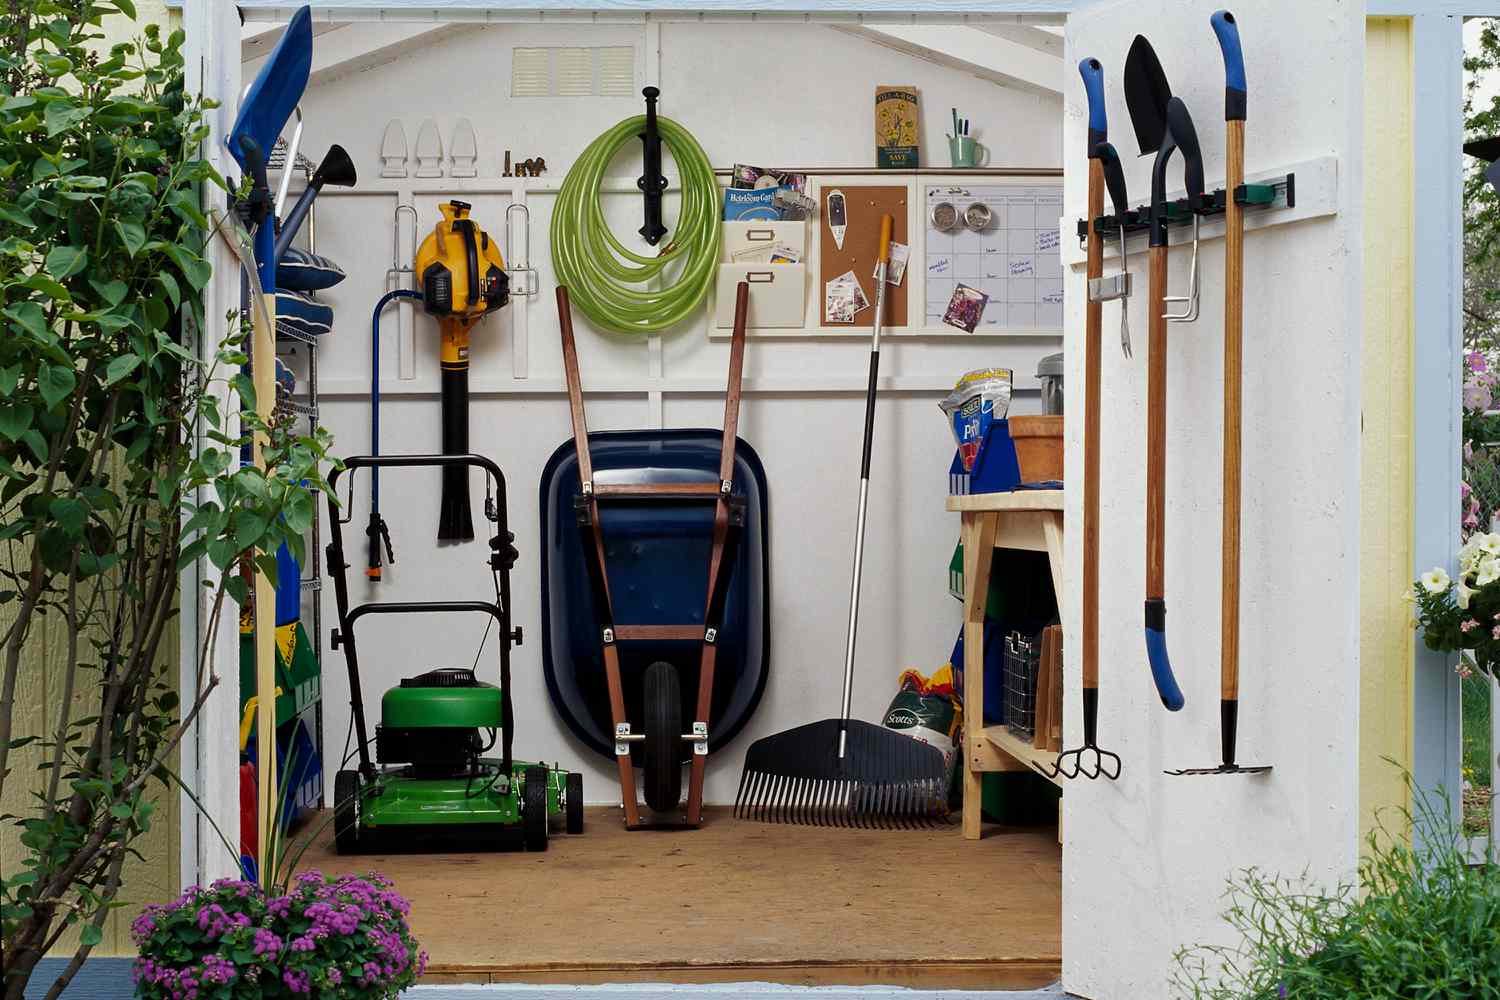 How To Store A Lawn Mower In Garage